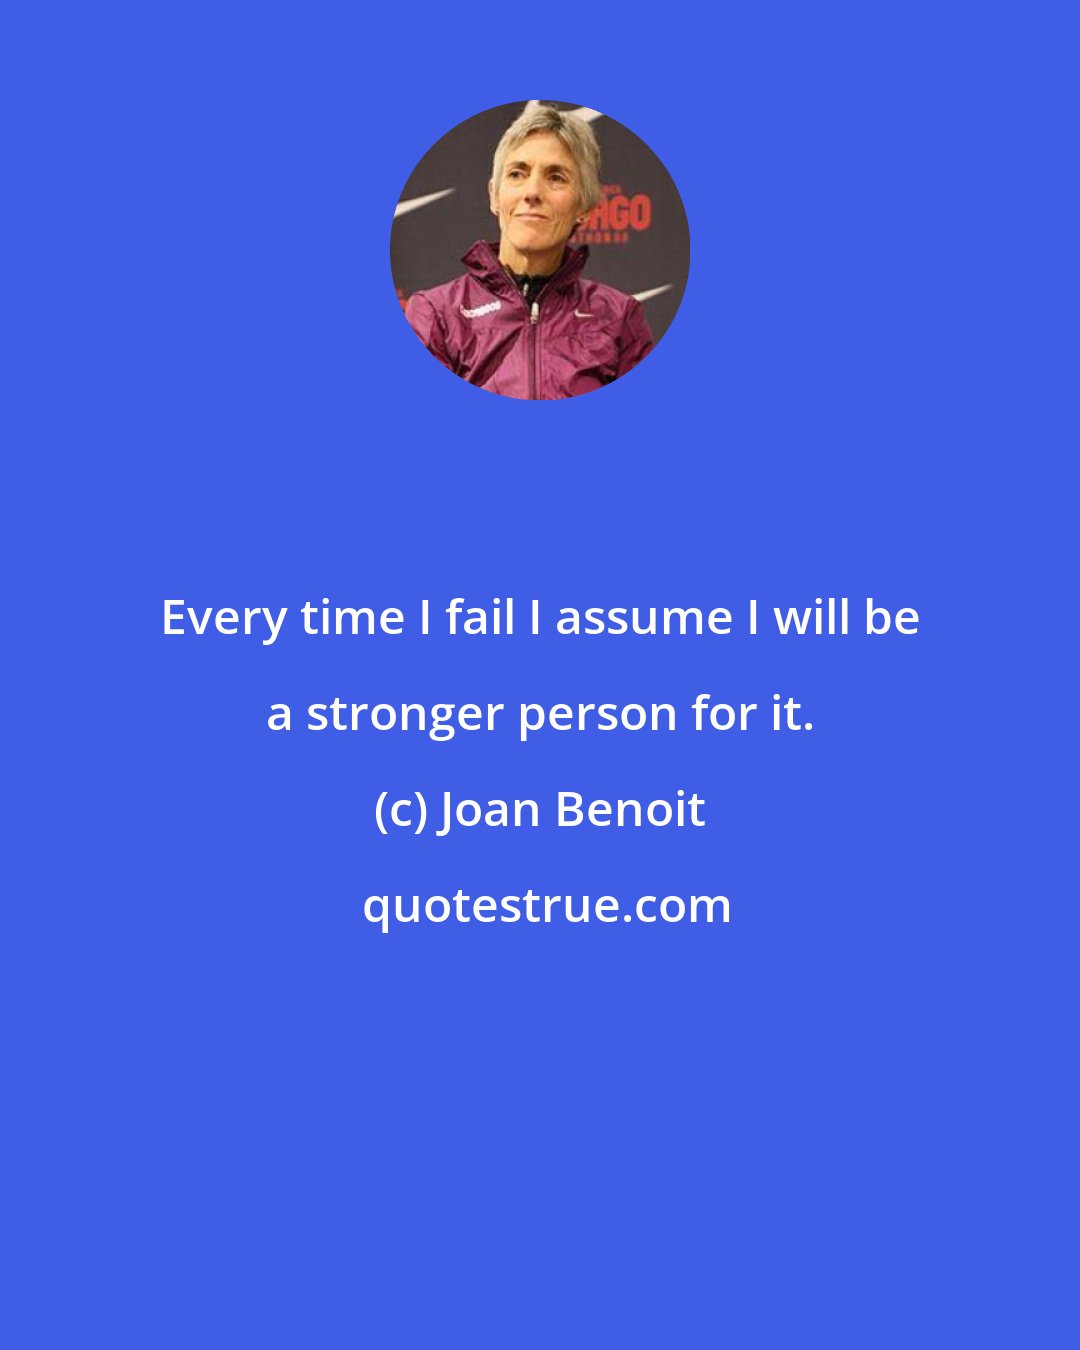 Joan Benoit: Every time I fail I assume I will be a stronger person for it.